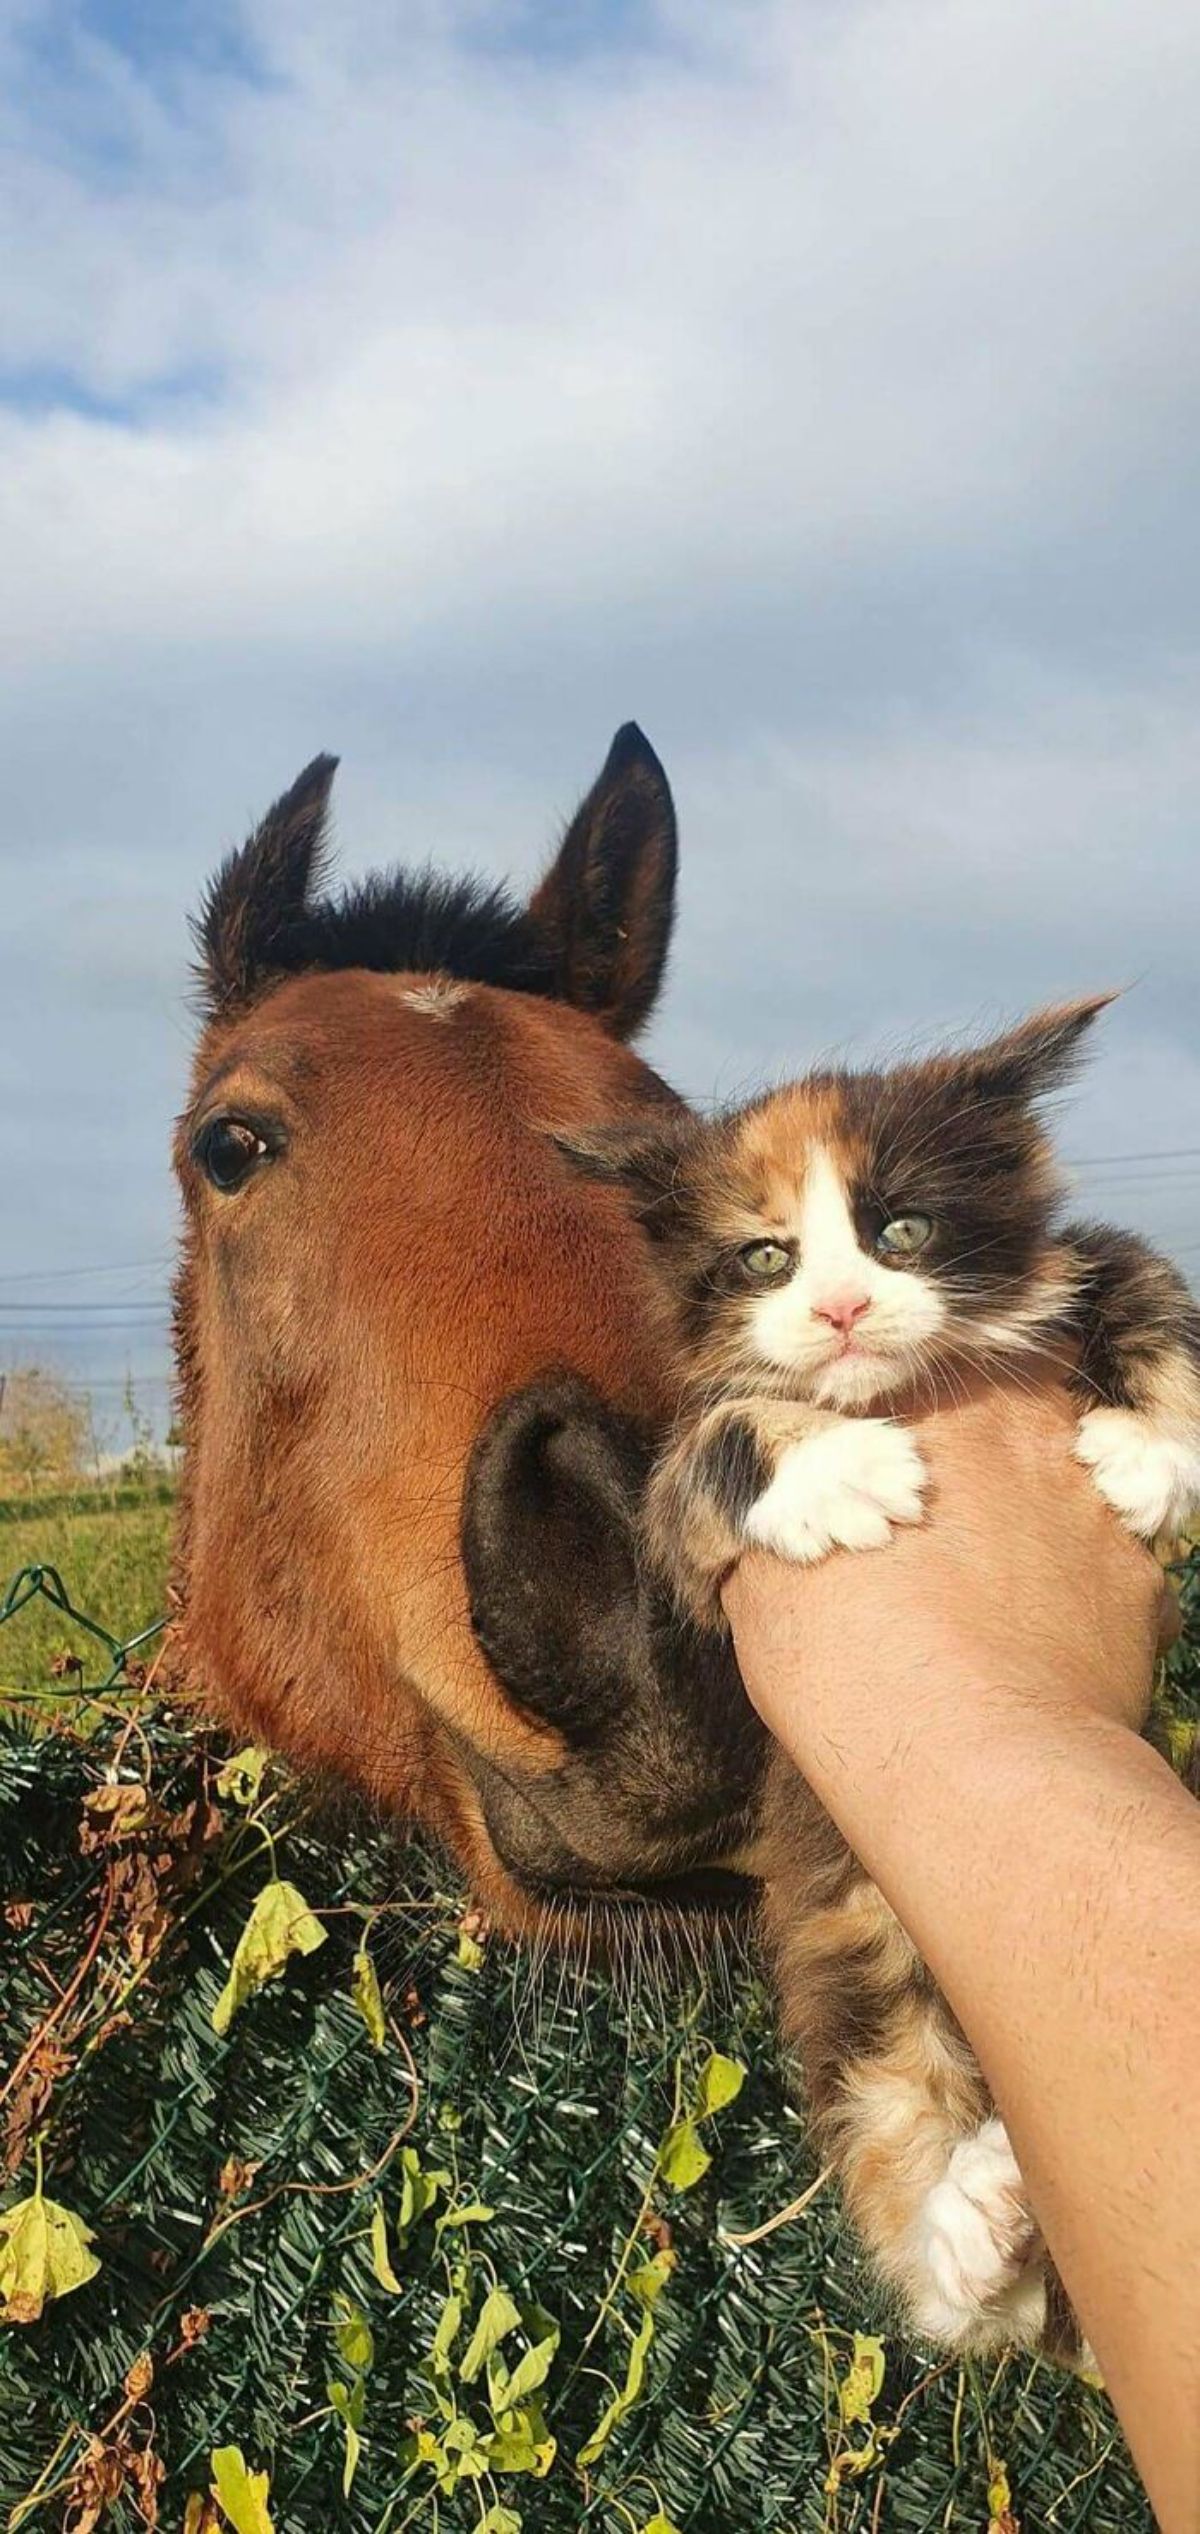 someone holding up a fluffy black white and orange kitten up to a brown horse